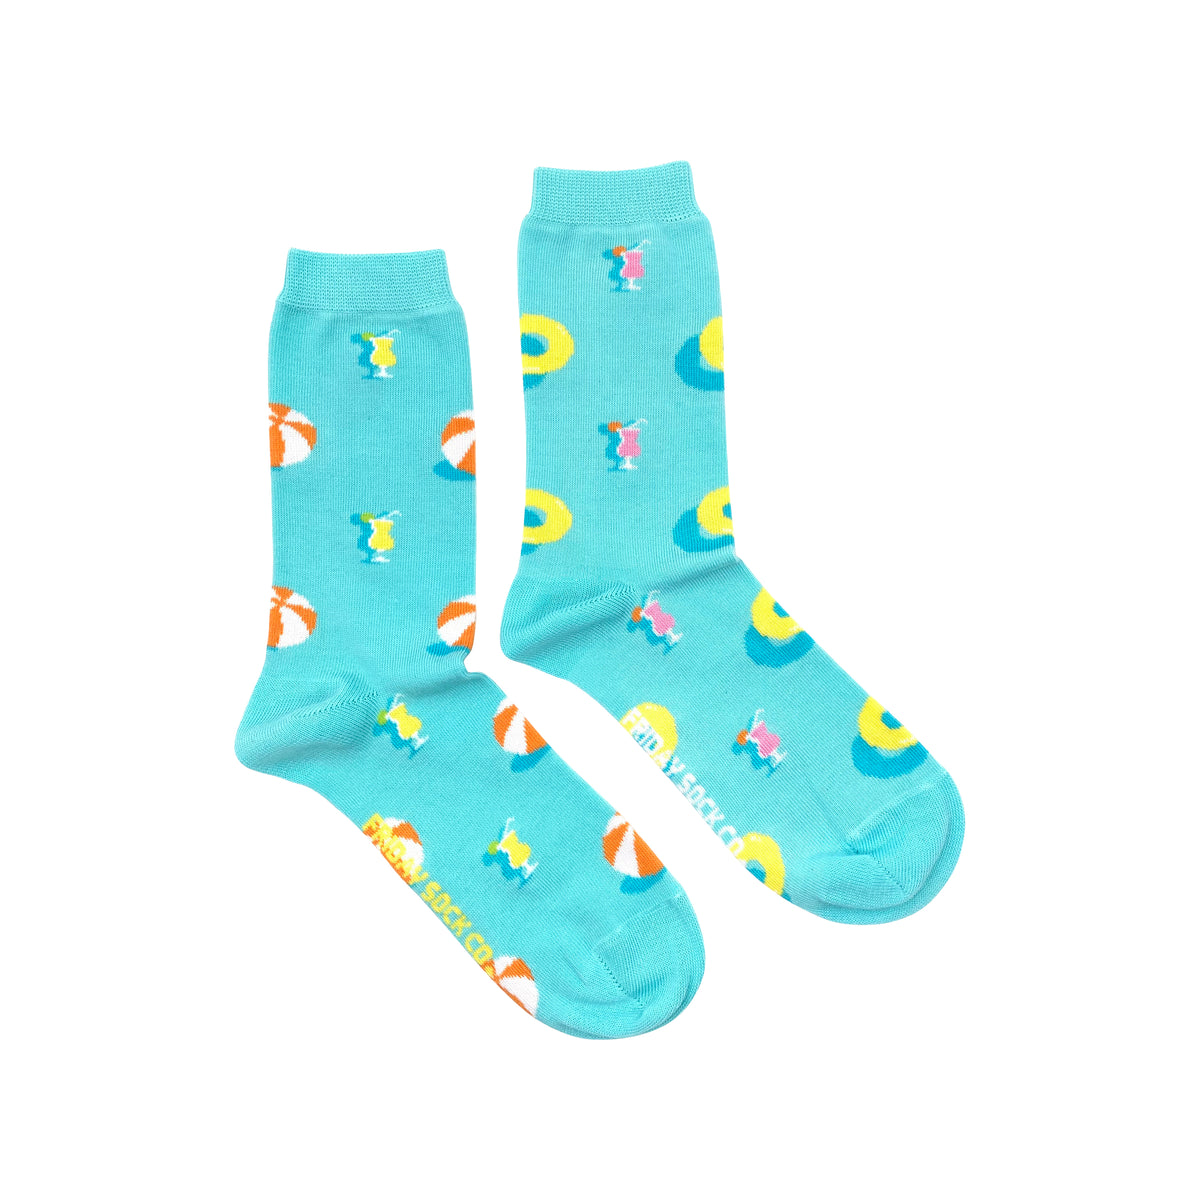 Women's Pool Party Socks | Mismatched by Design | Friday Sock Co.